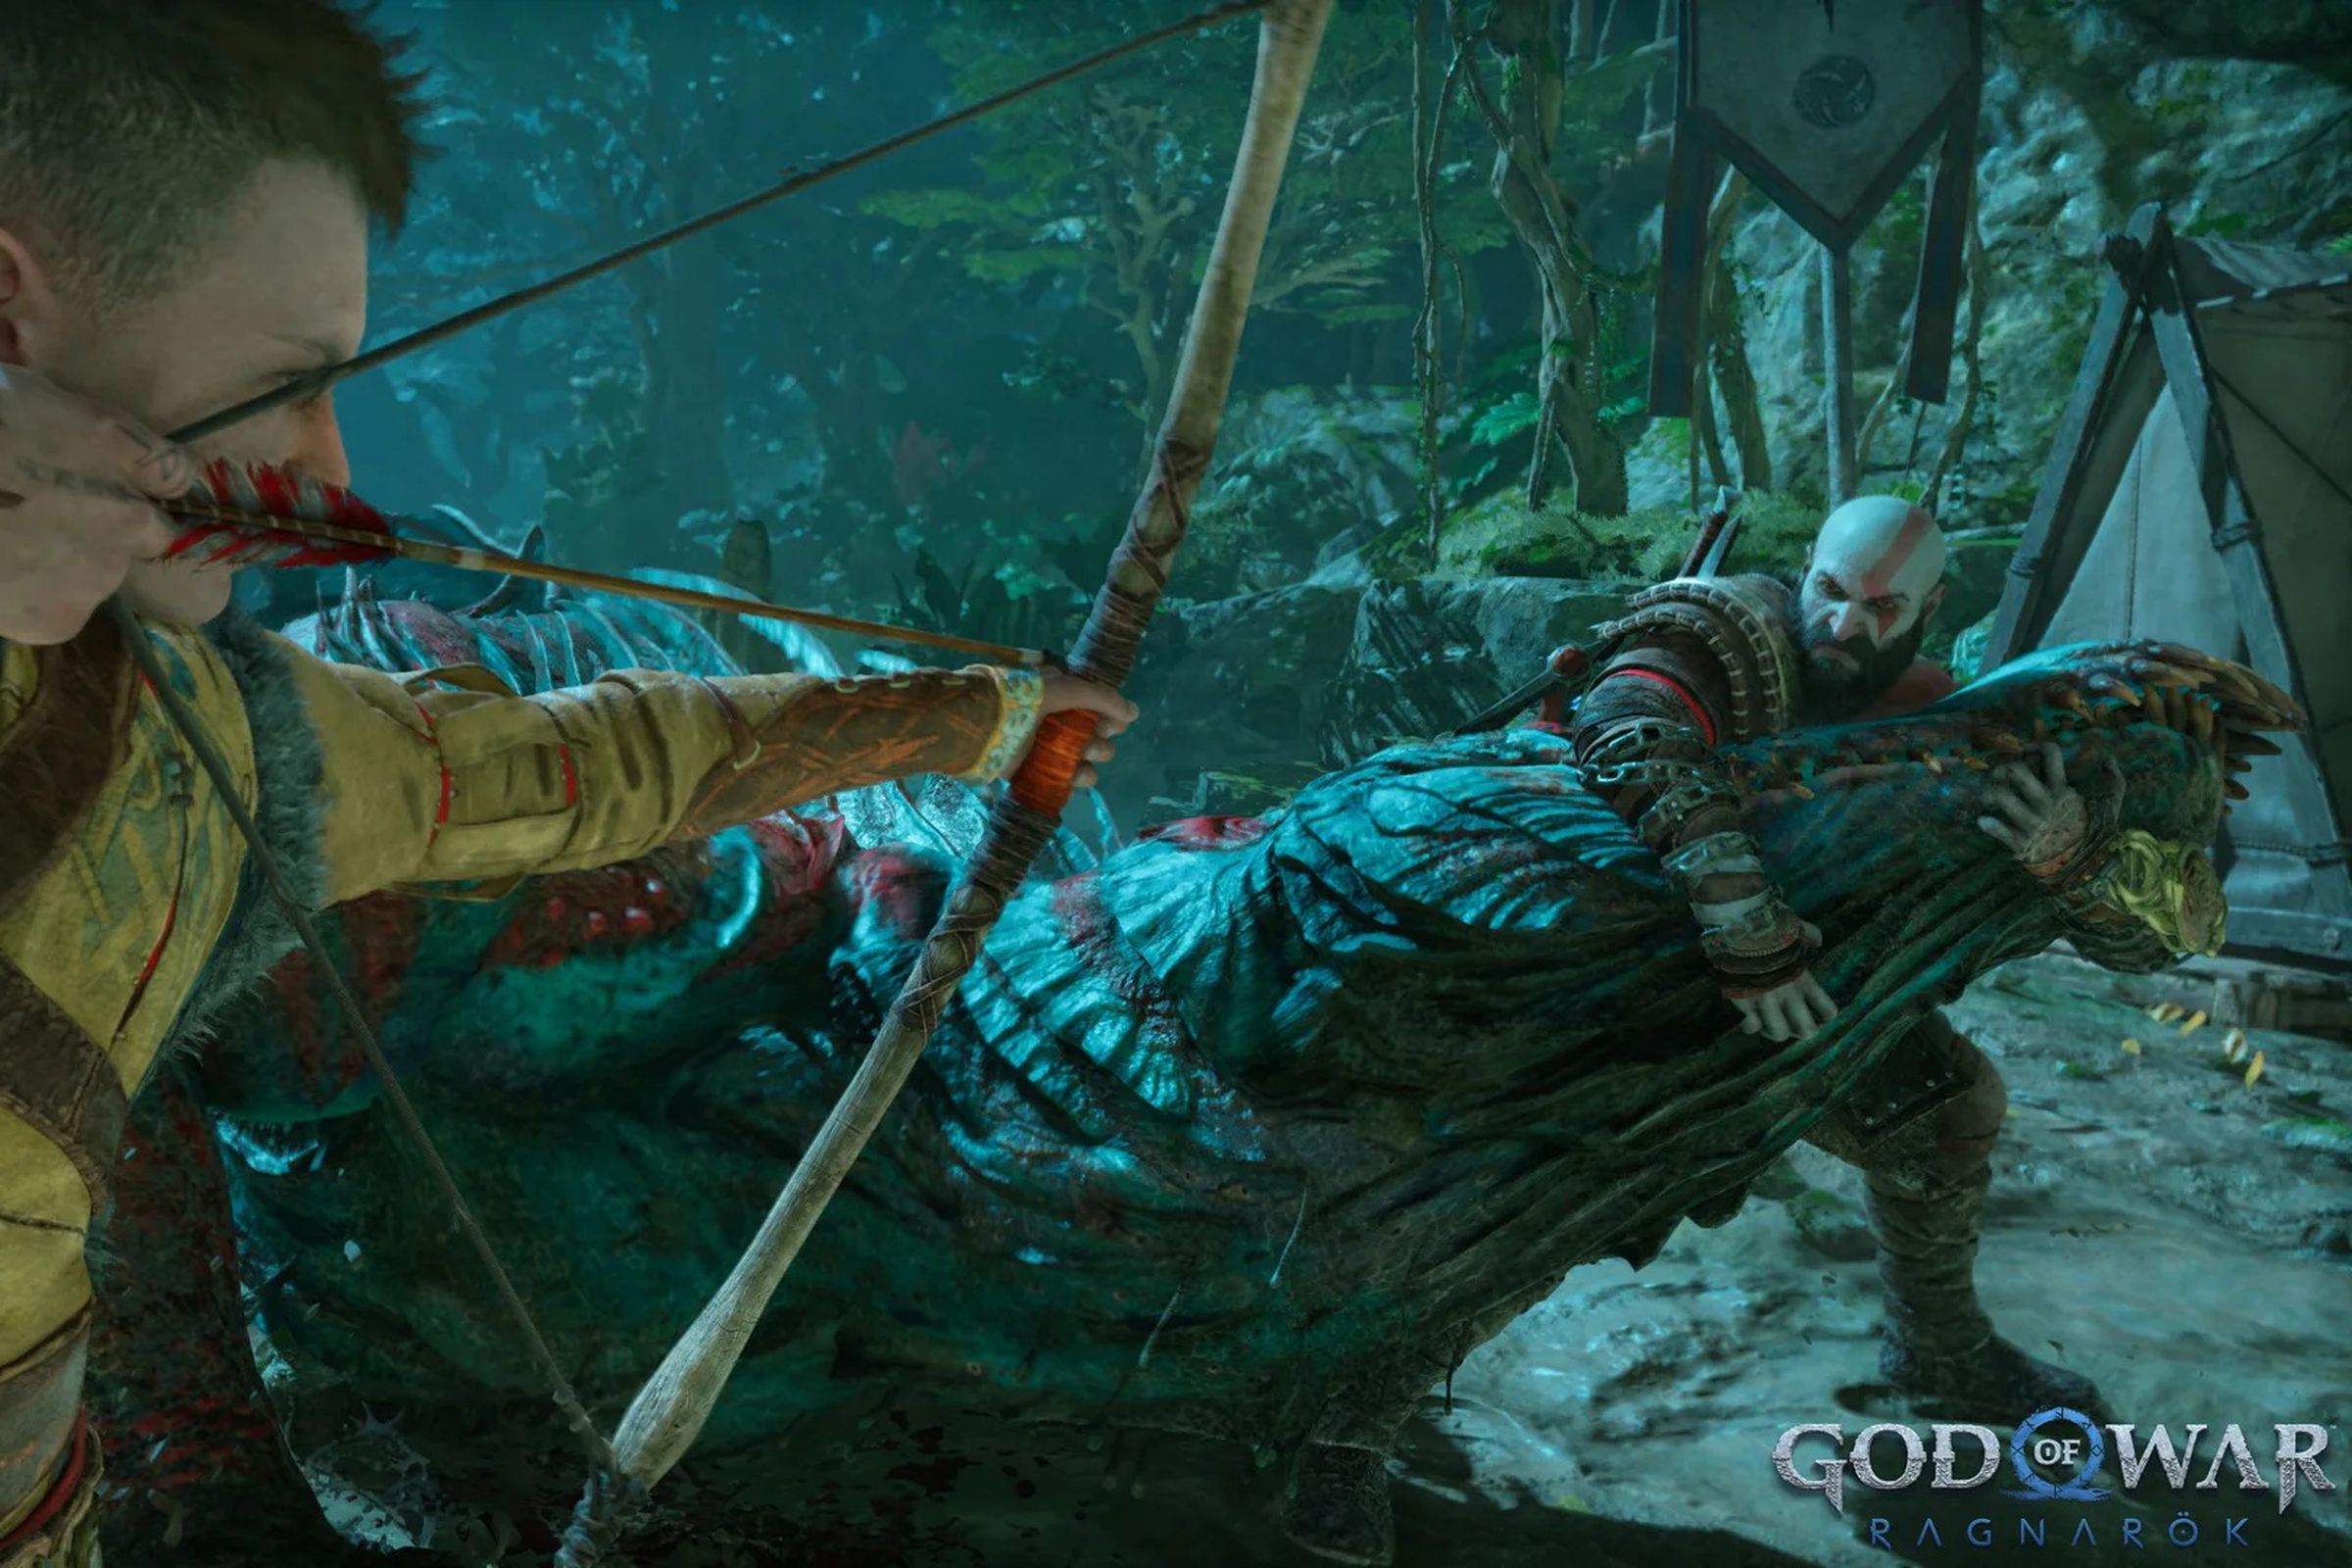 A screenshot from God of War Ragnarok. Atreus is has an arrow notched in his bow that’s pointed at a monster being held down by Kratos.